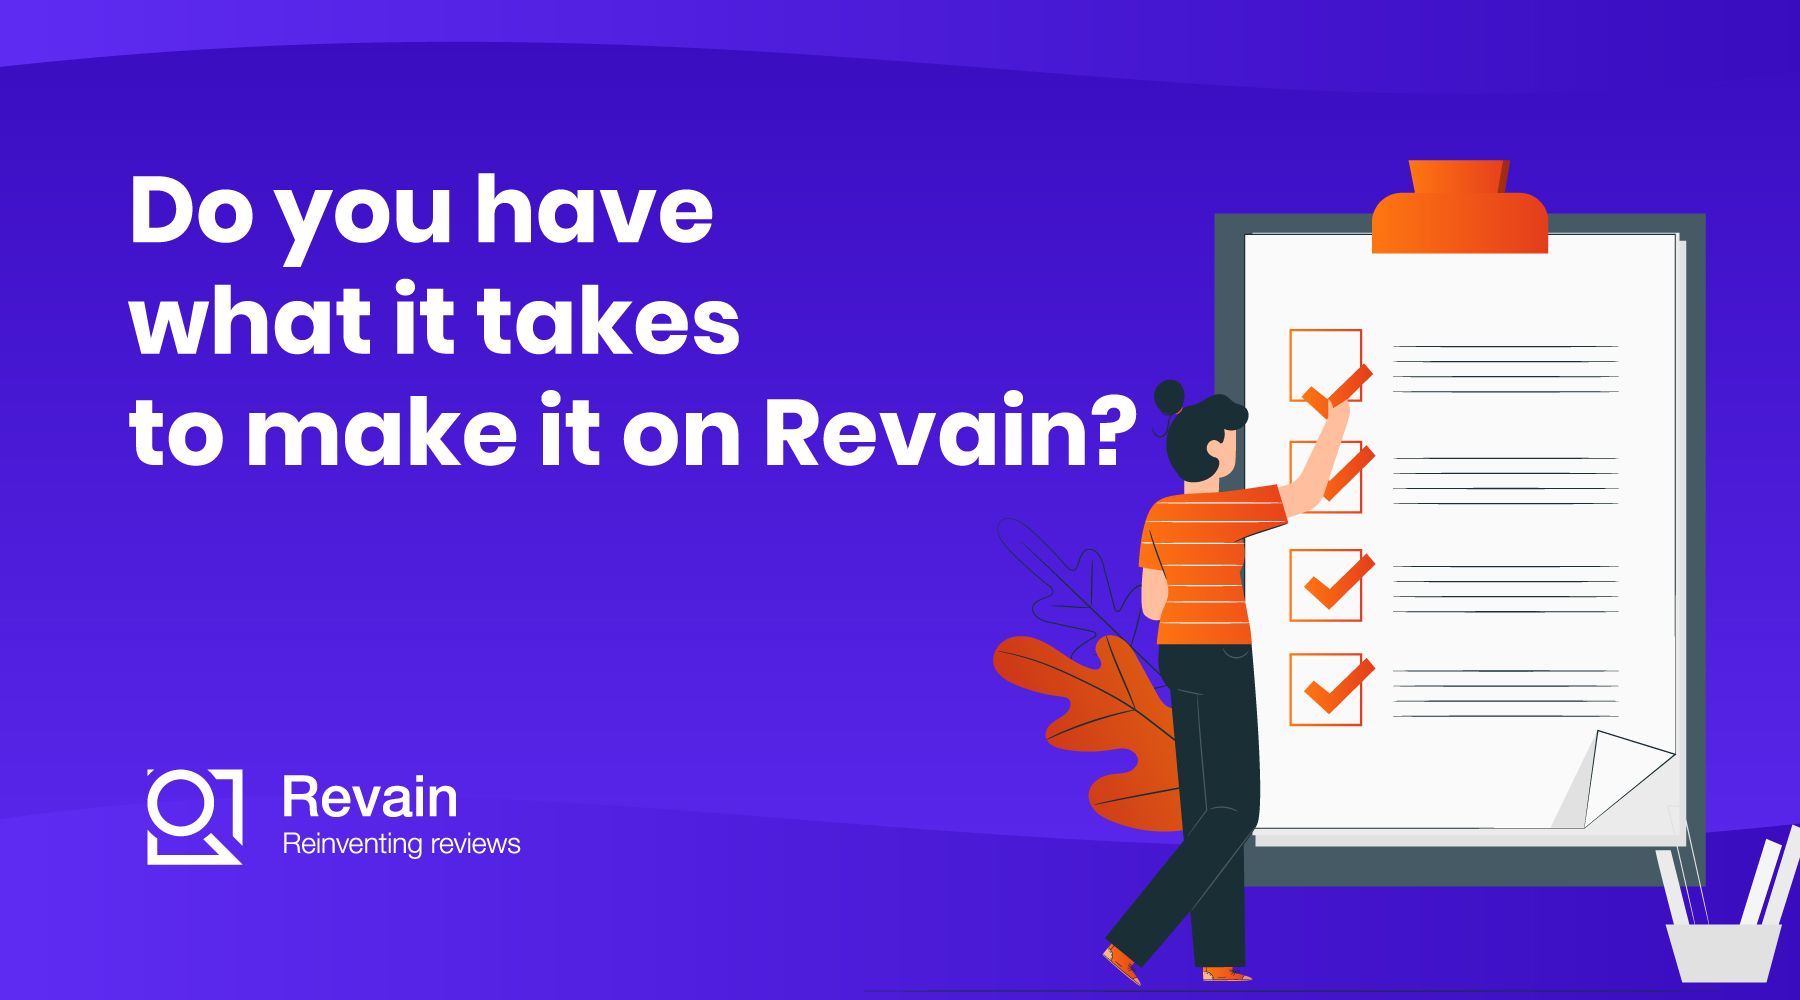 Do you have what it takes to make it on Revain? We think you do.